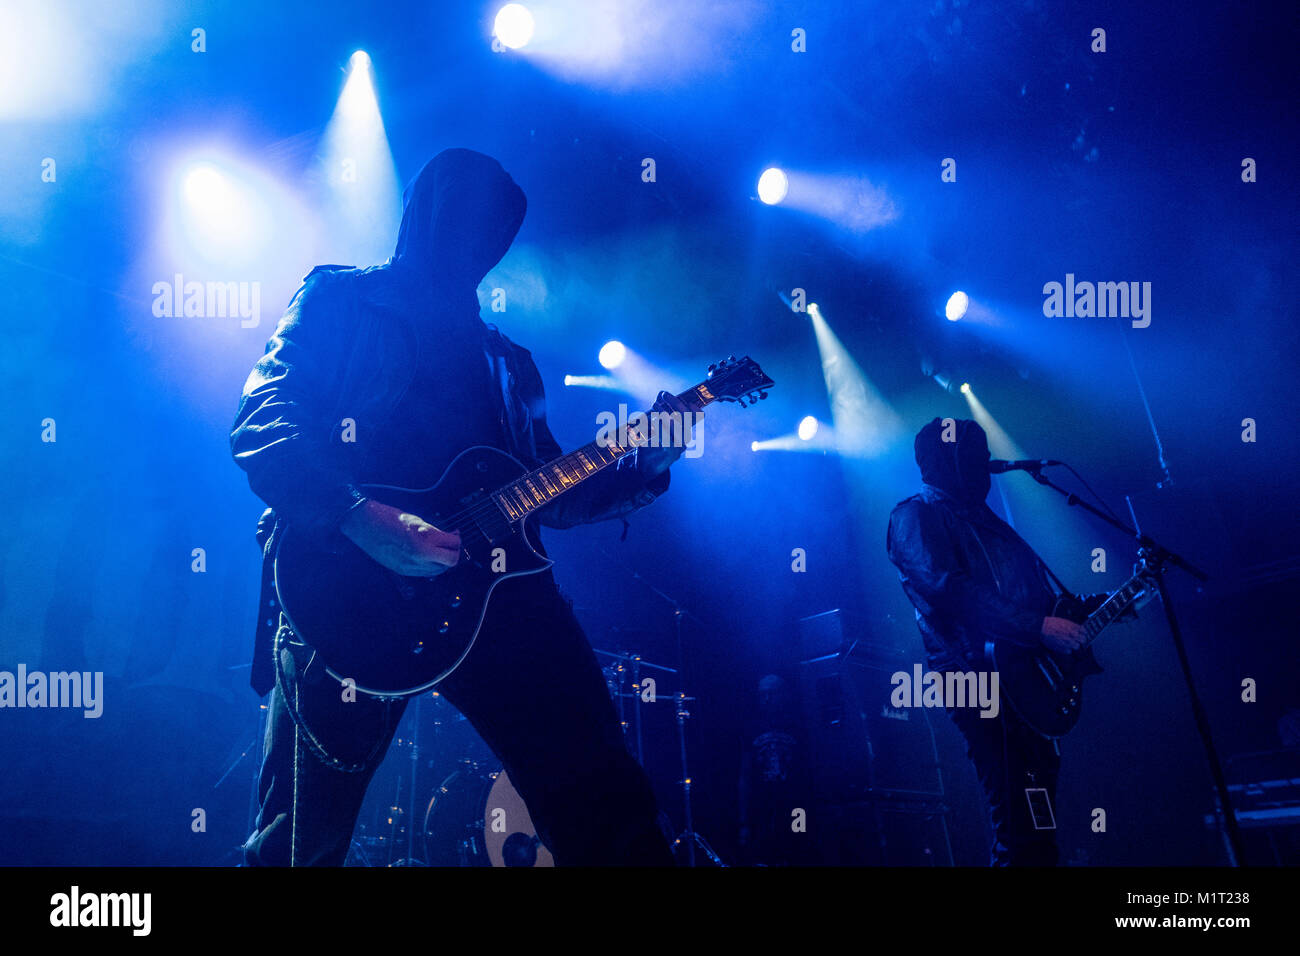 Norway, Bergen - August 24, 2017. The Polish black metal band Mgla performs a live concert at the Norwegian metal festival Beyond the Gates 2017 in Bergen. Here vocalist and guitarist Mikolaj Zentara a.k.a M (R) is seen live on stage with guitarist E.V.T. (L). (Photo credit: Gonzales Photo / Jarle H. Moe). Stock Photo